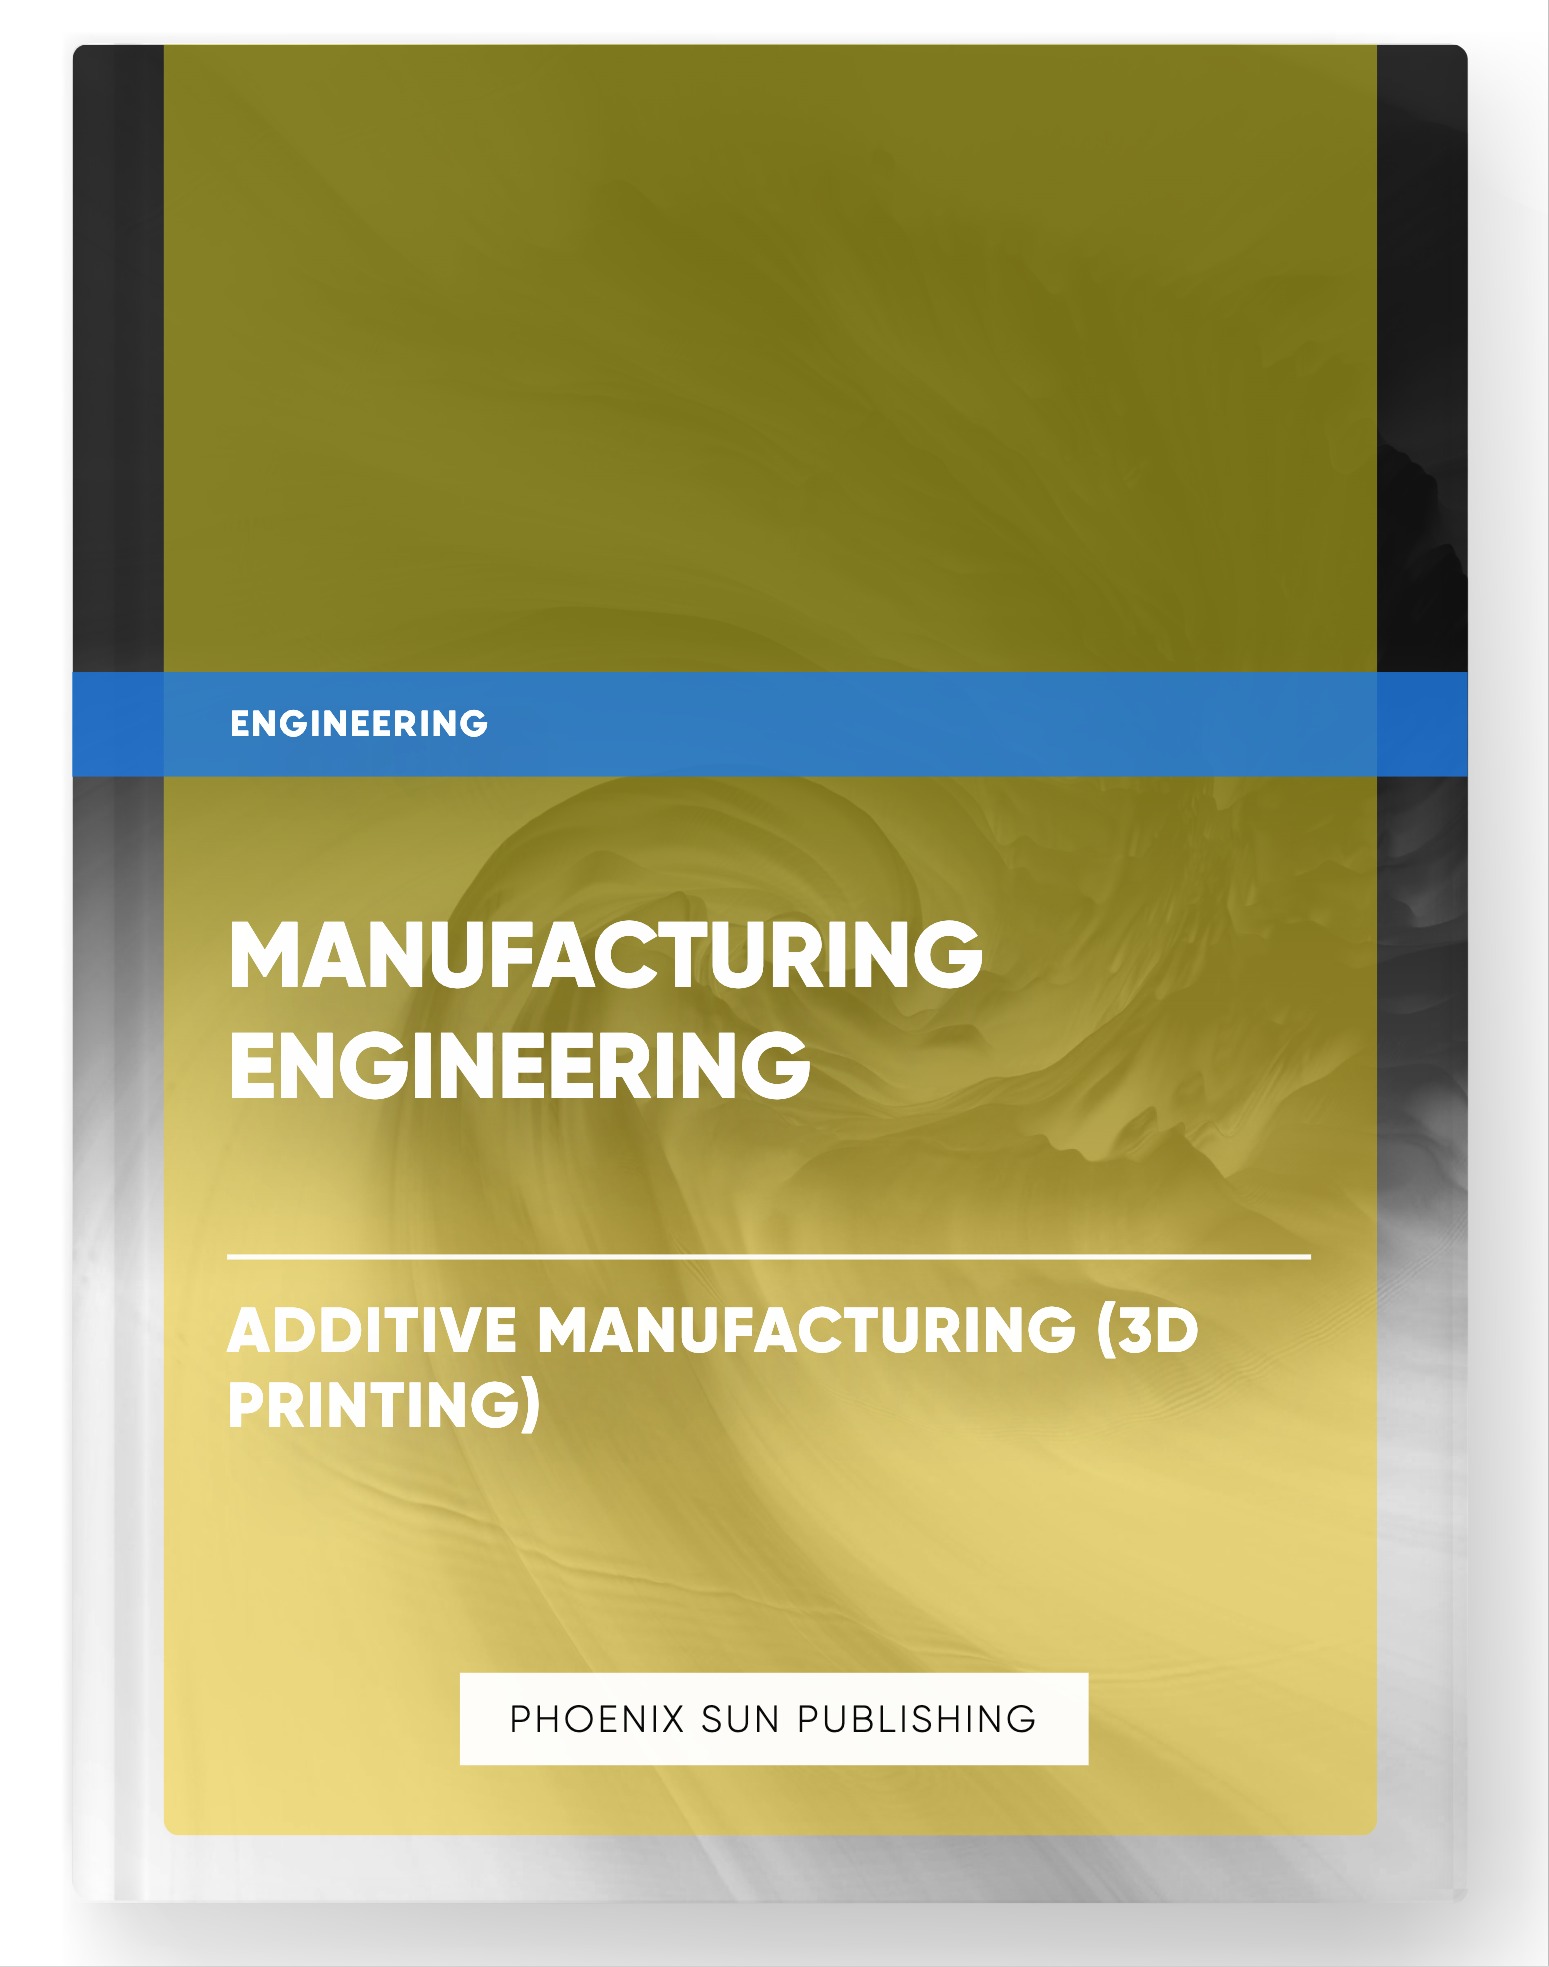 Manufacturing Engineering – Additive Manufacturing (3D Printing)